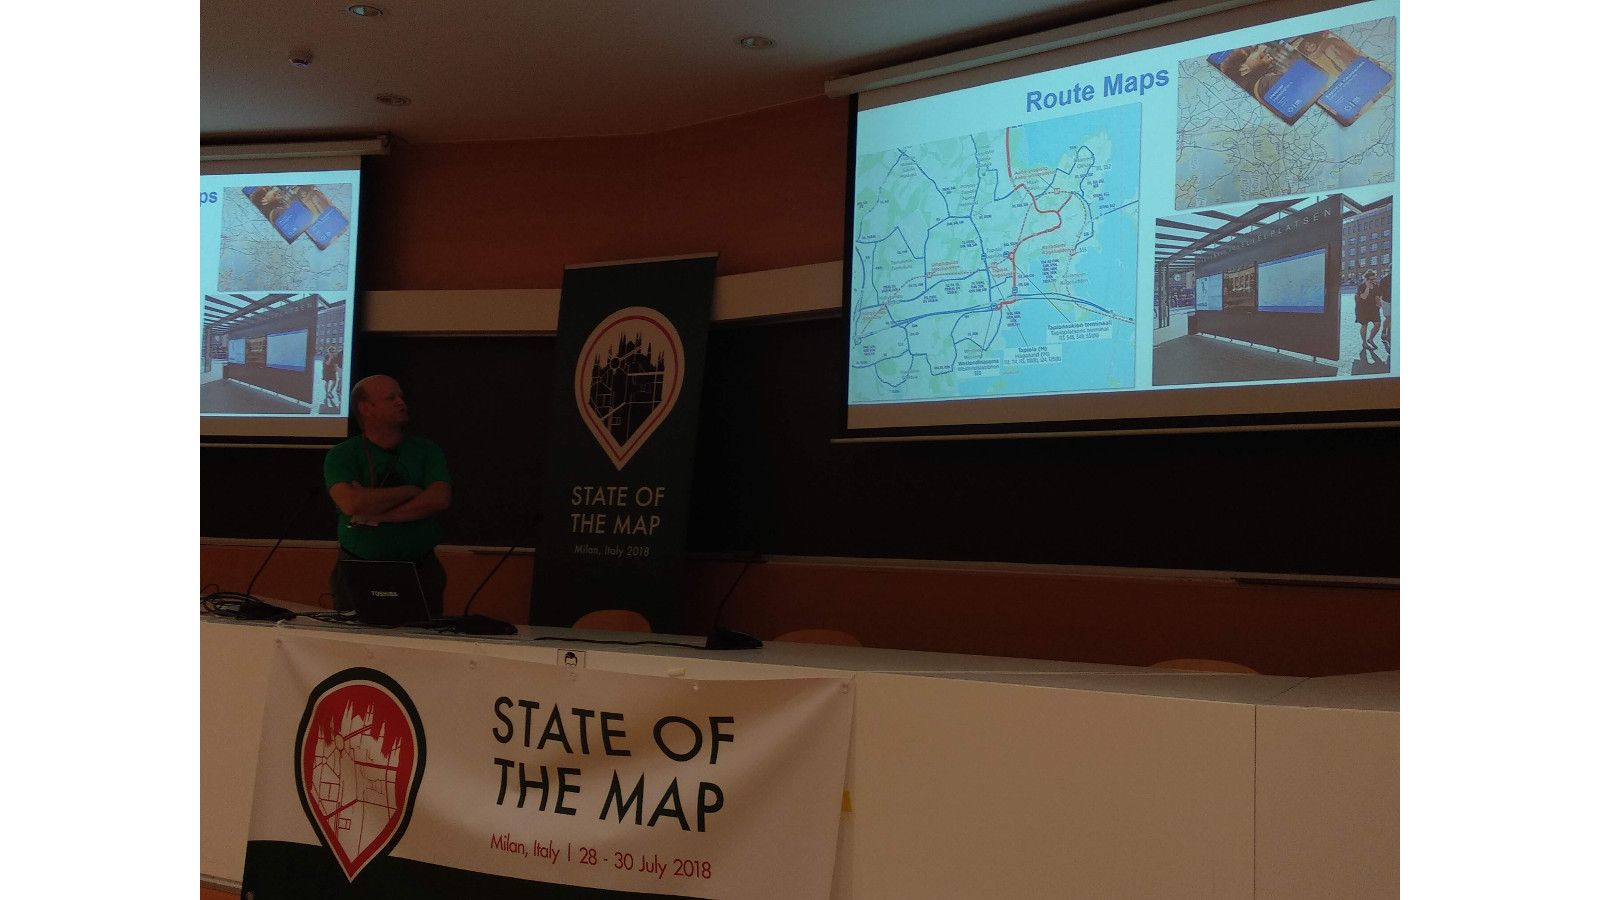 2018-08-03-highlights-from-the-openstreetmap-conference-2.jpg